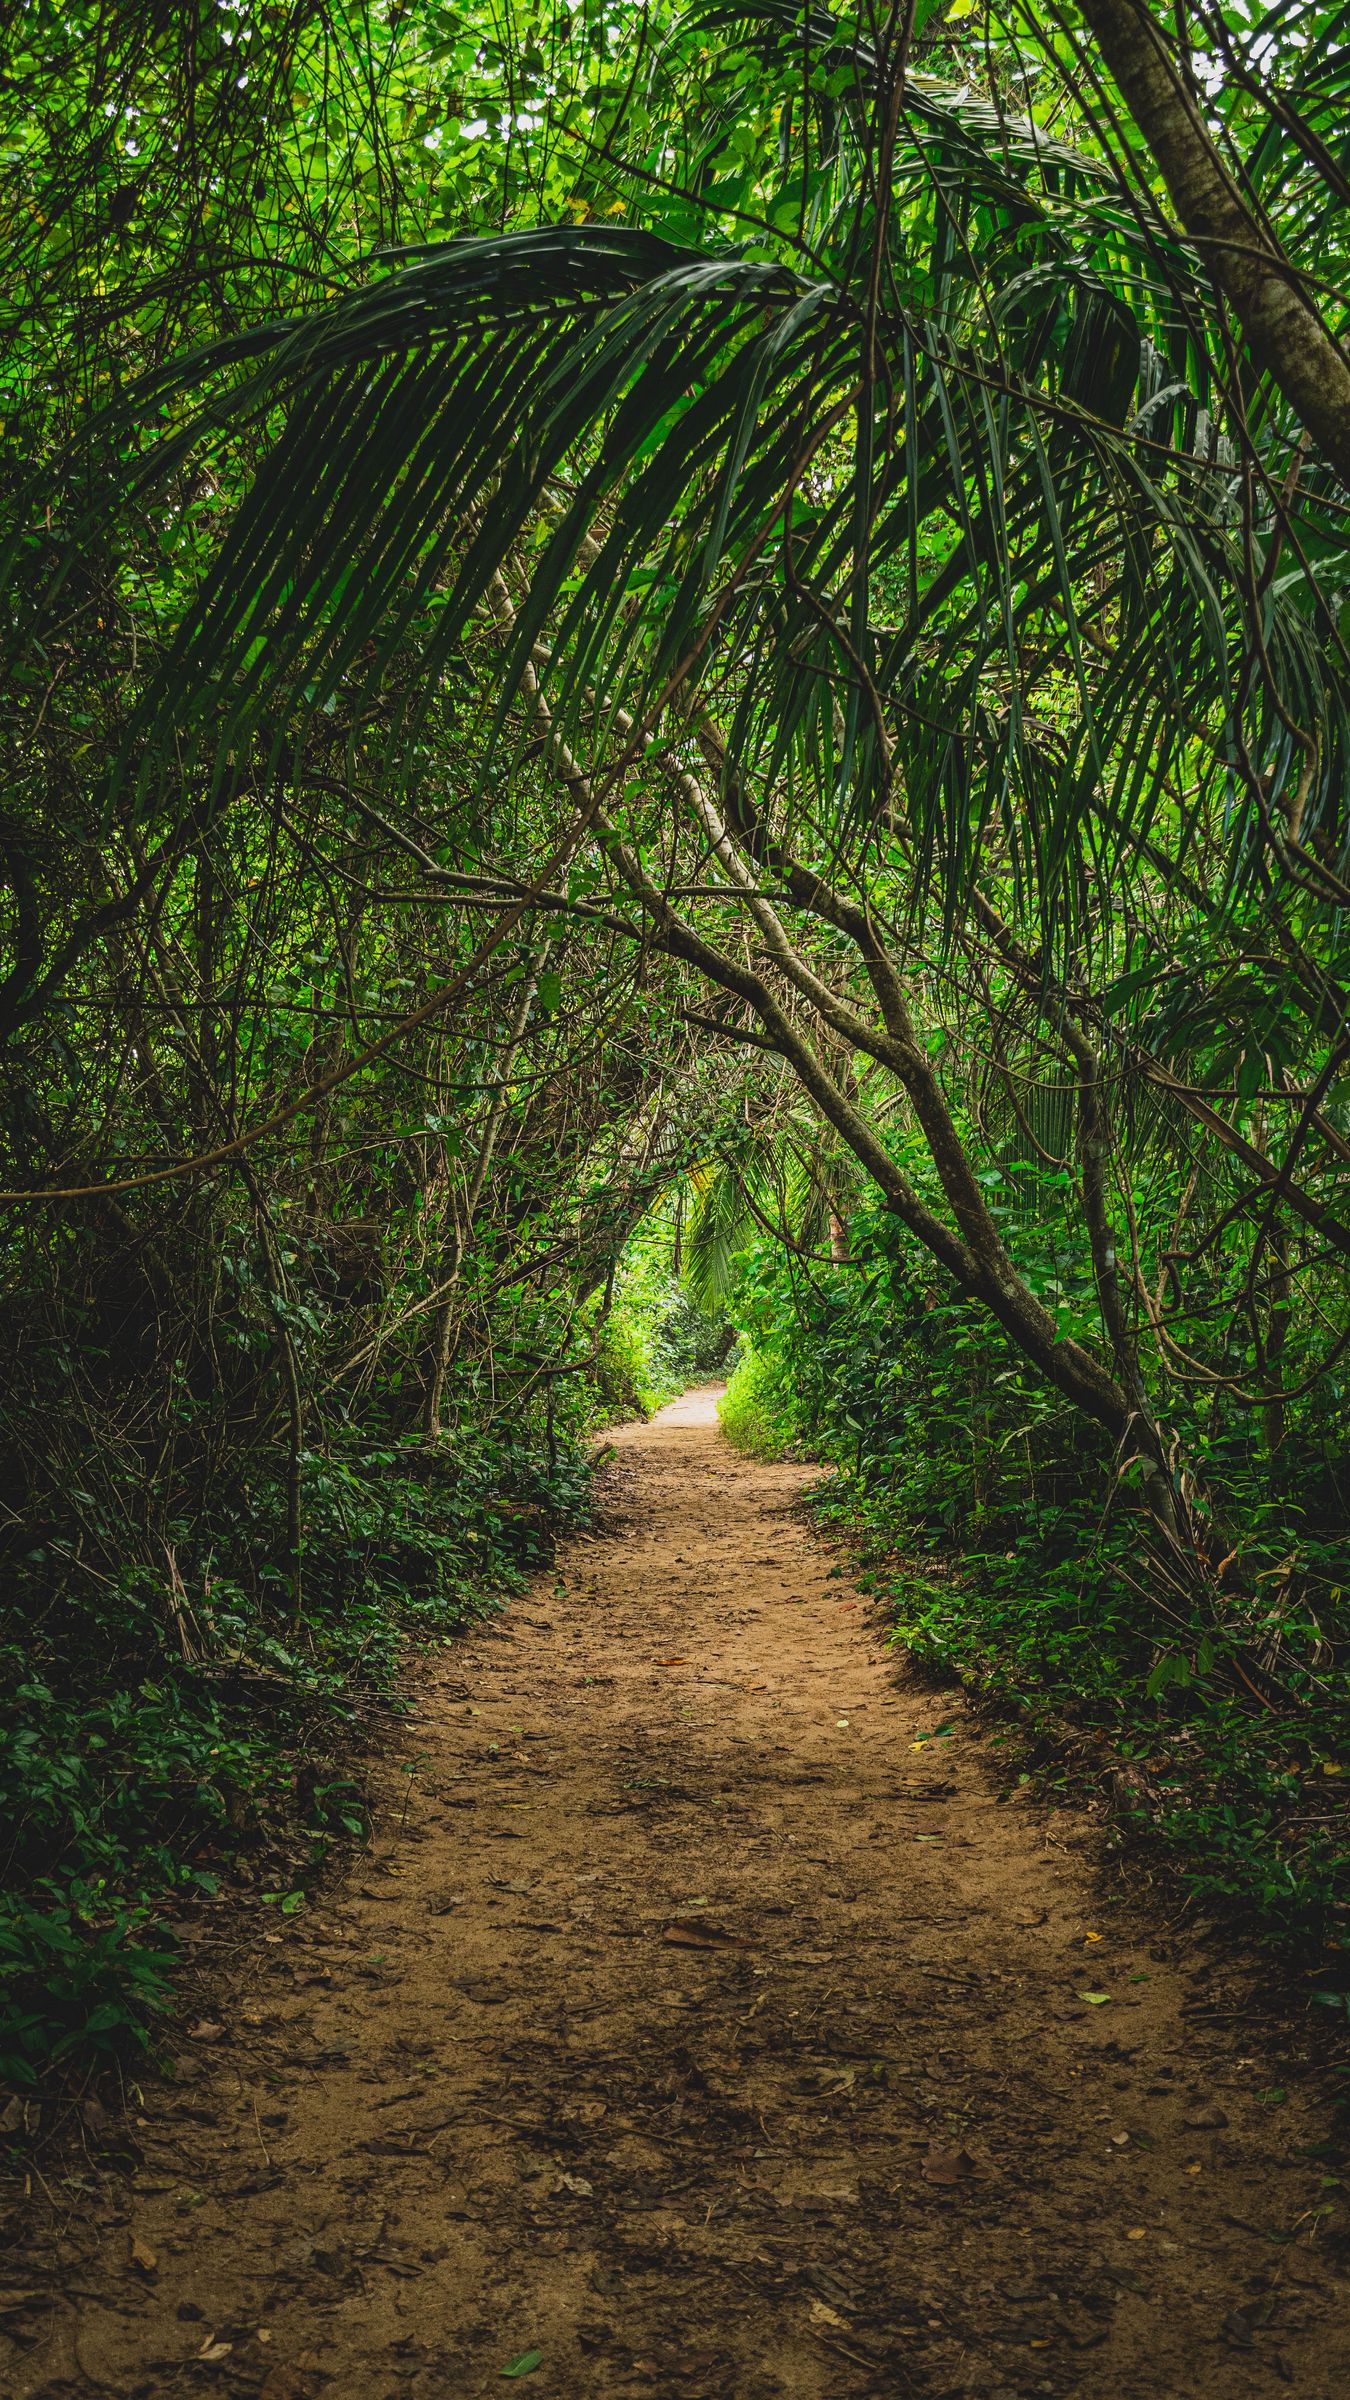 Download wallpaper jungle, path, trees, bushes, nature iphone parallax hd background